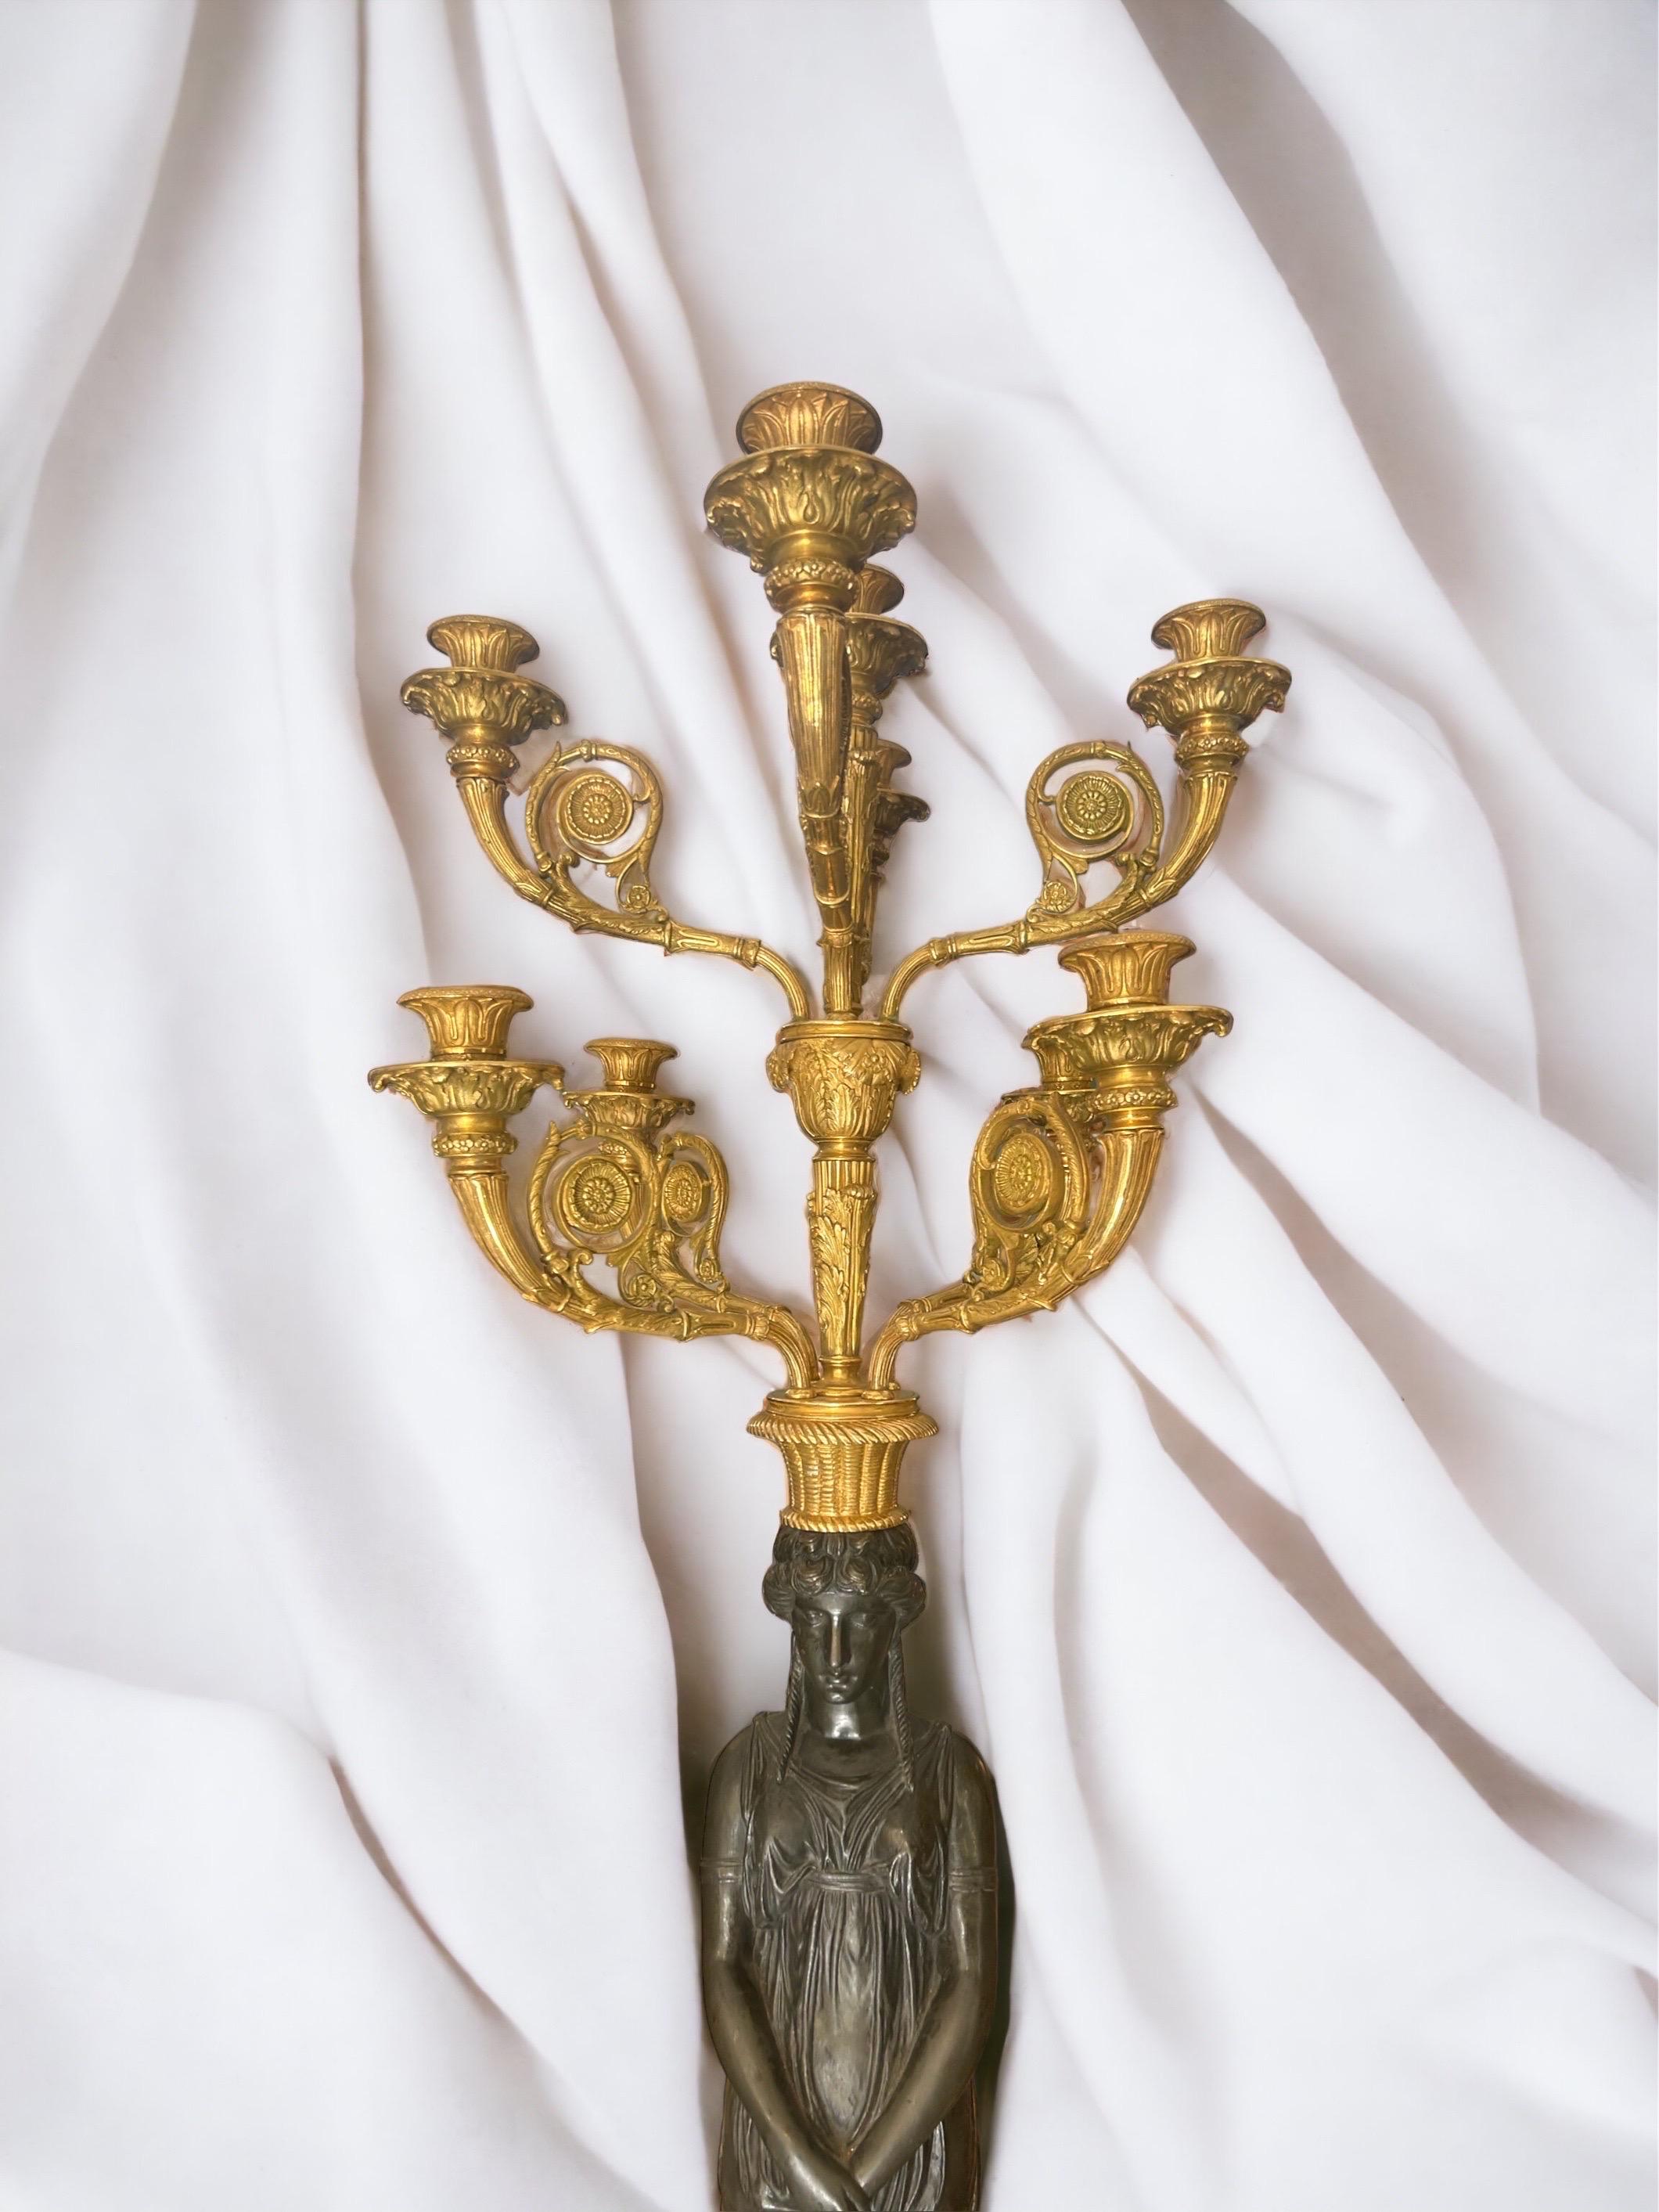 Hand-Carved Pair of 19th Century Candelabras Sculpted in 2 Tone Bronze Gilding